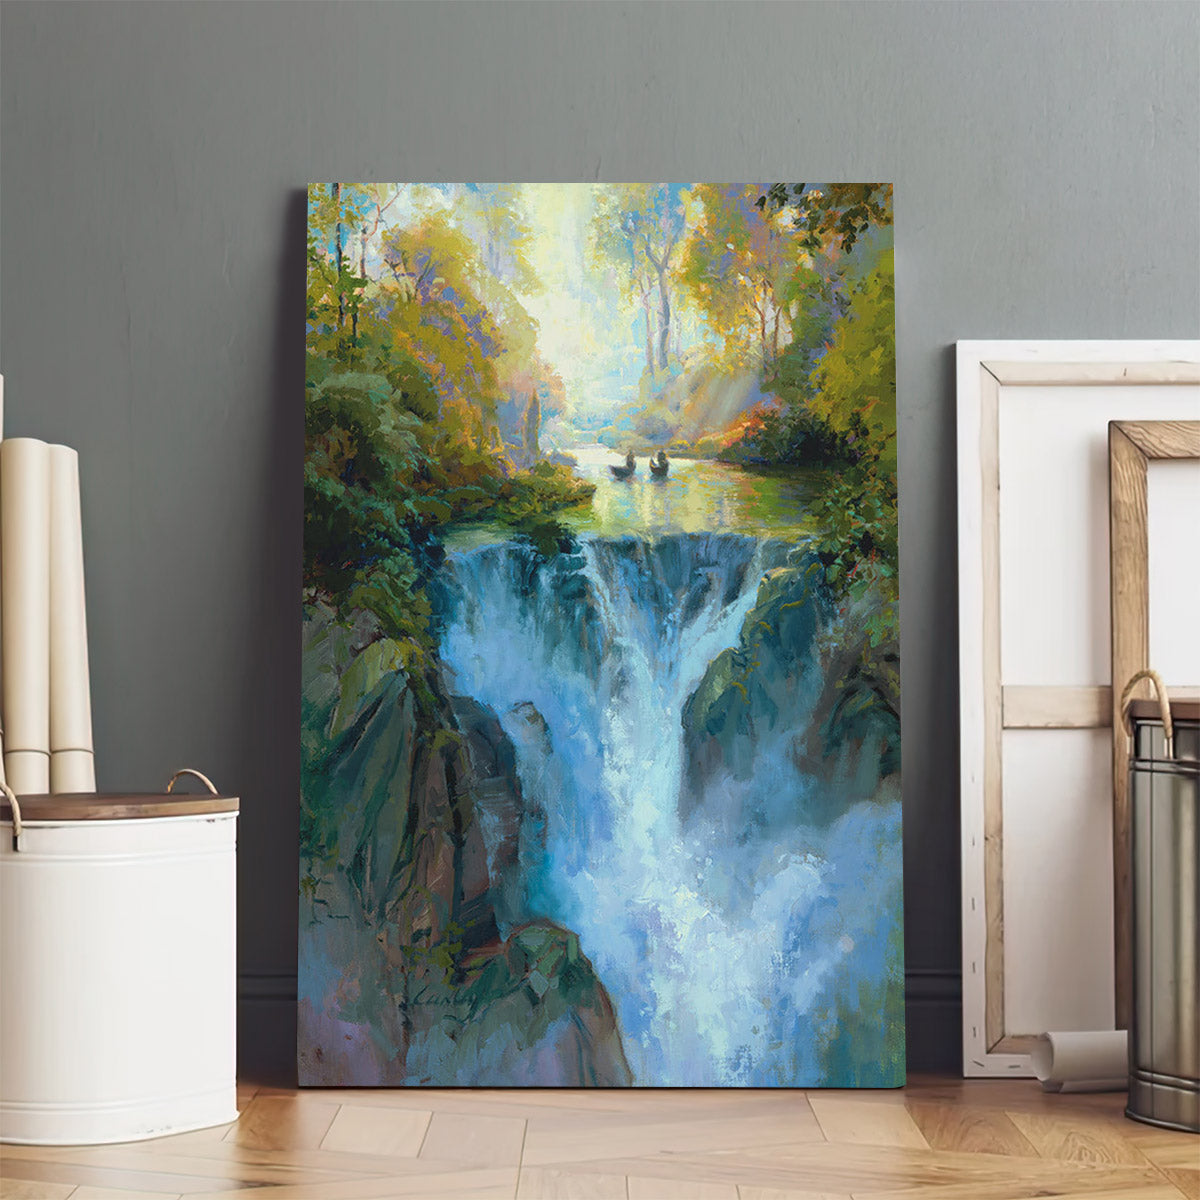 Gently Up The Stream Canvas Pictures - Jesus Canvas Art - Christian Wall Art